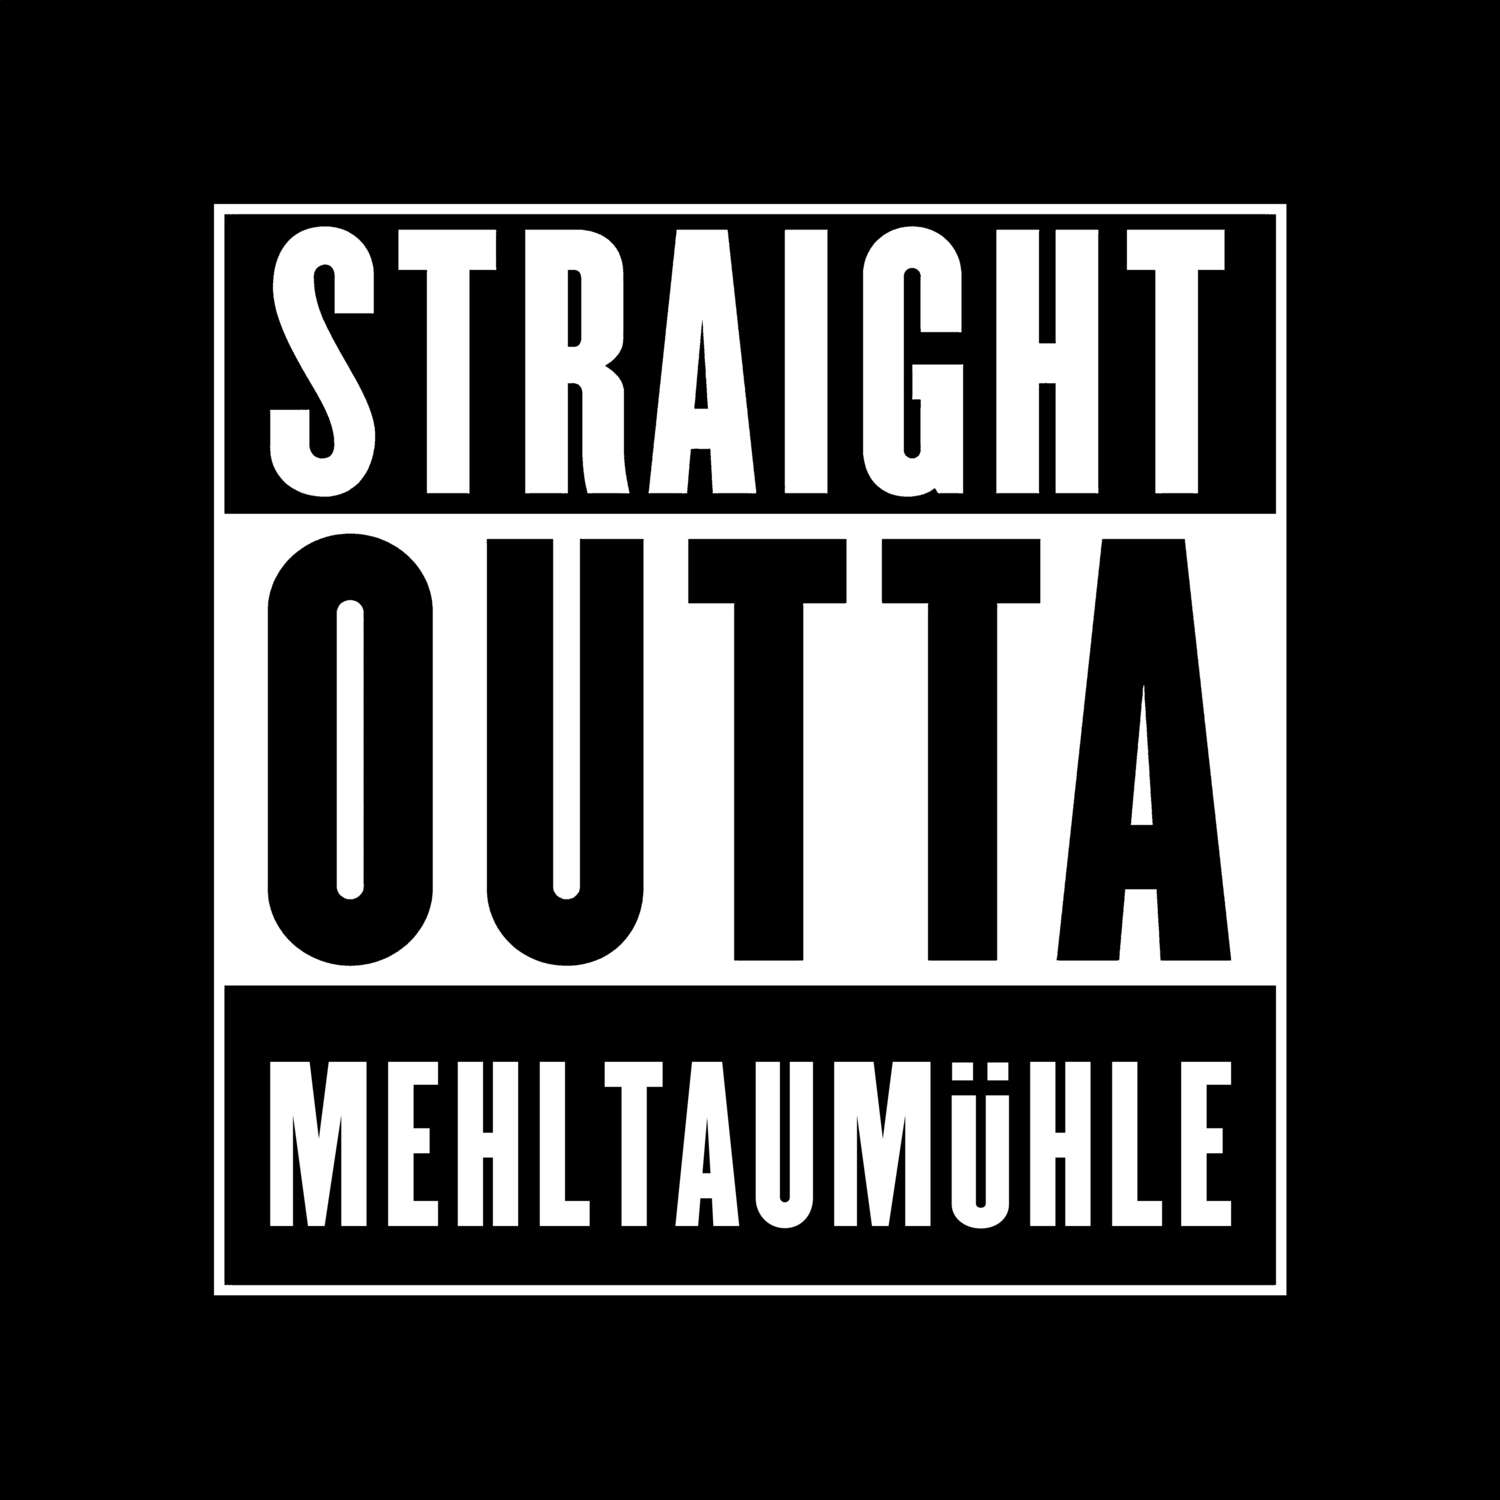 Mehltaumühle T-Shirt »Straight Outta«